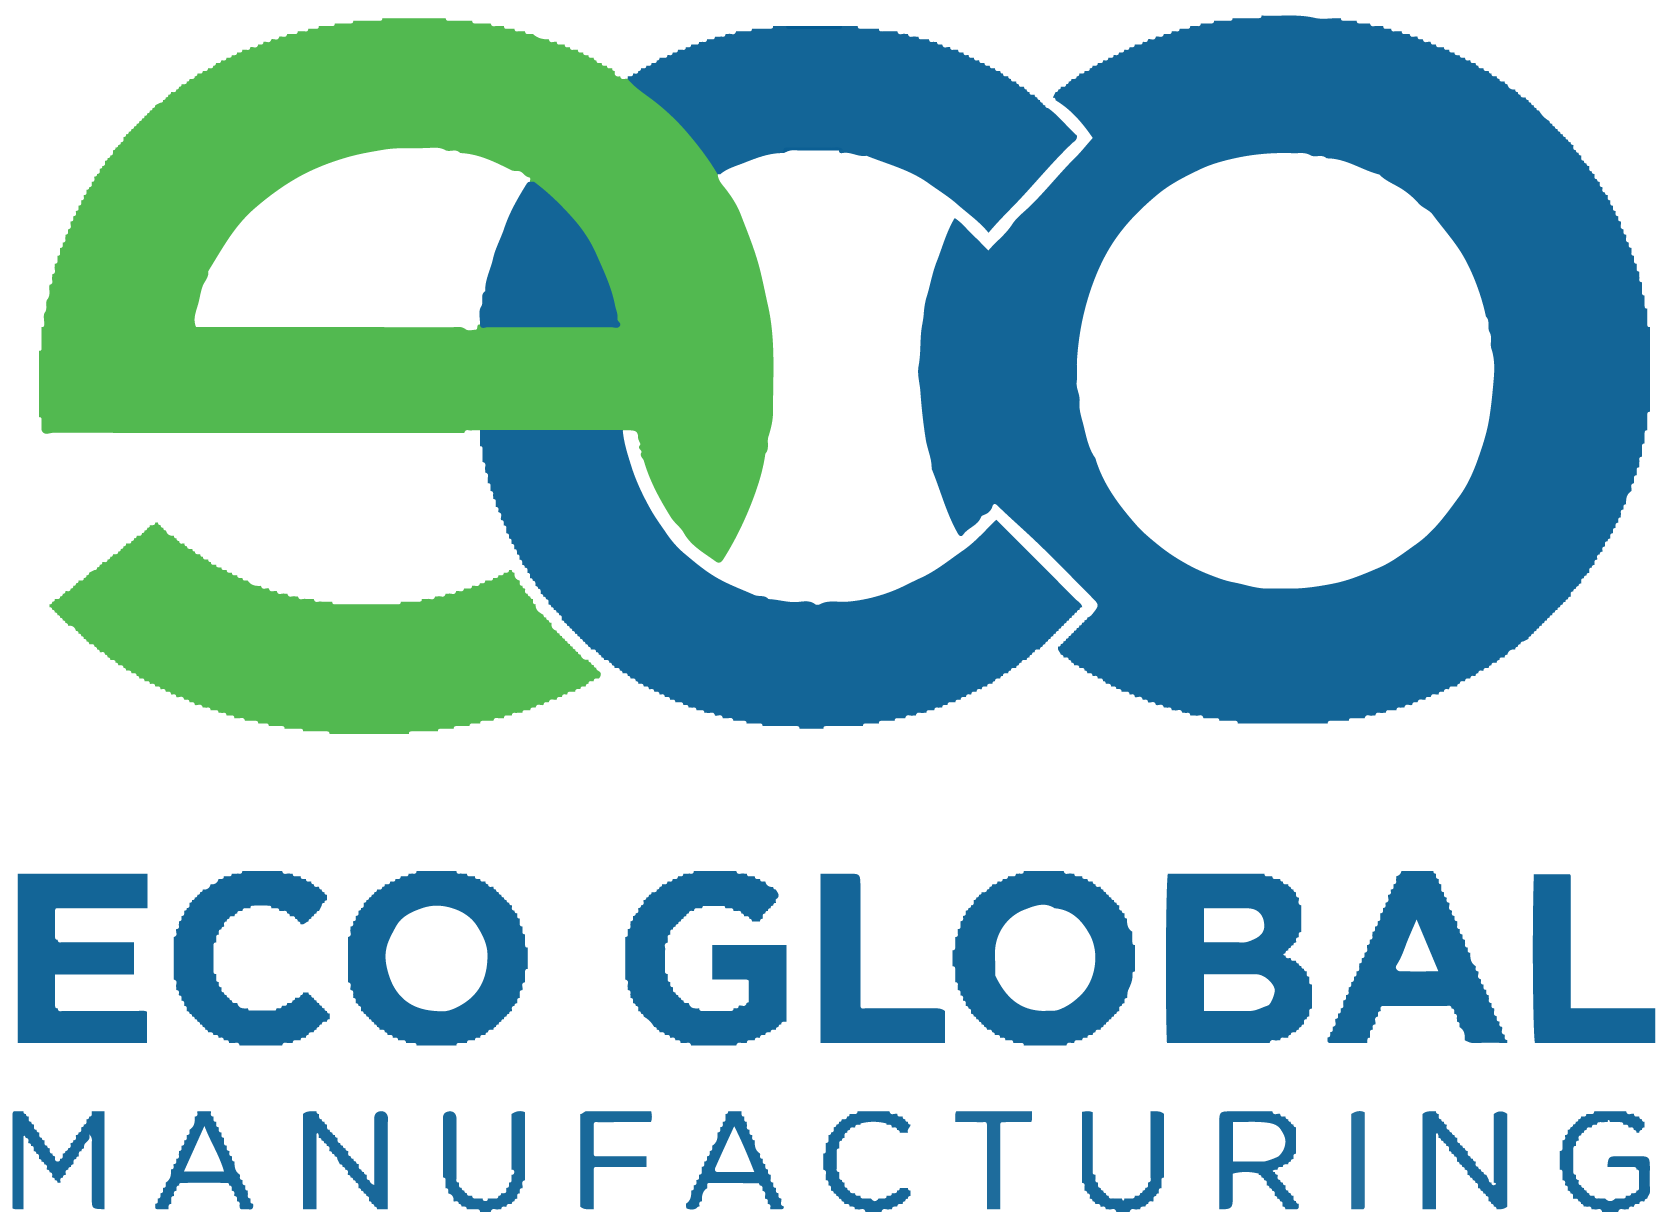 Eco-Global Manufacturing